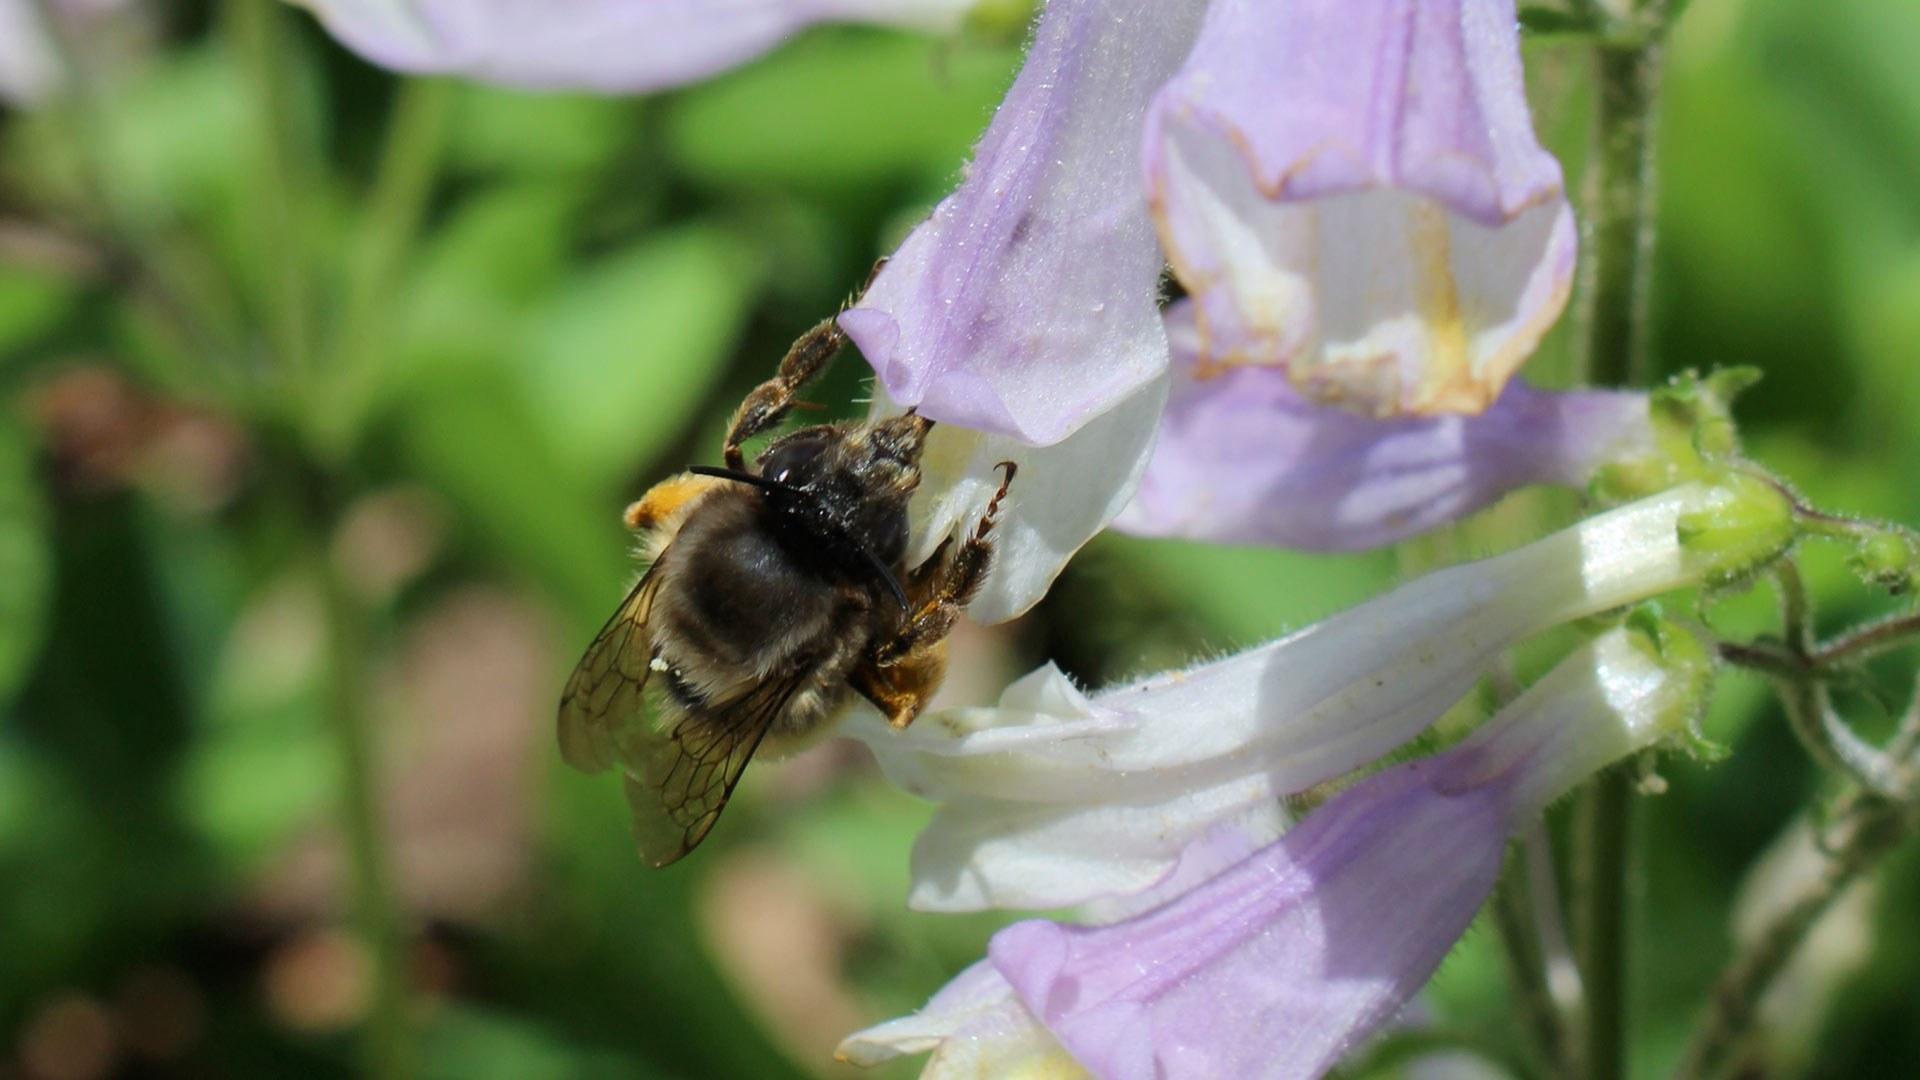 Bee pollinating flower